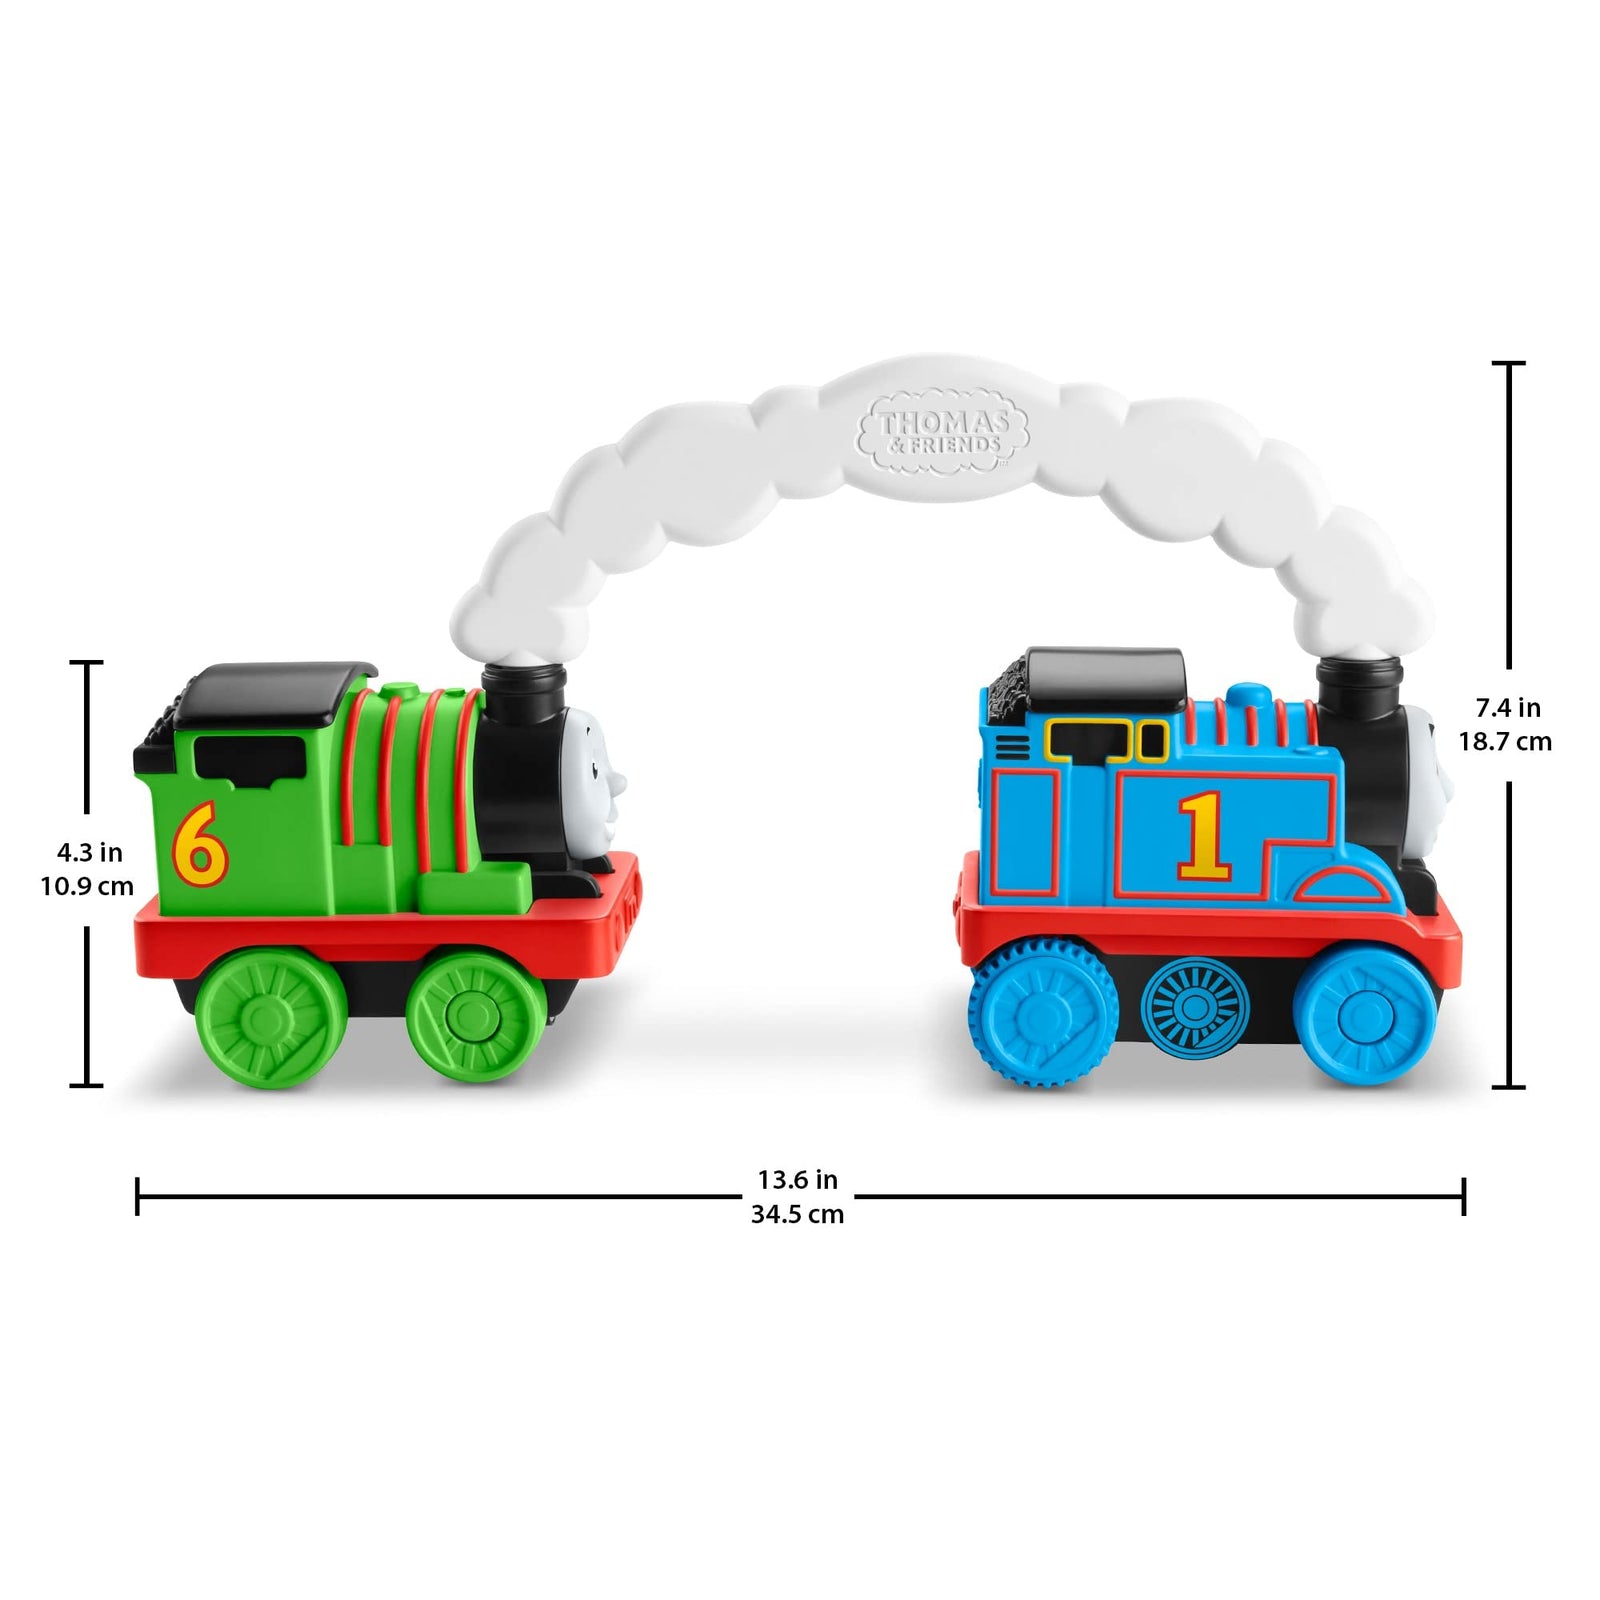 Fisher-Price Thomas & Friends Race & Chase R/C, remote controlled toy train engines for toddlers and preschool kids